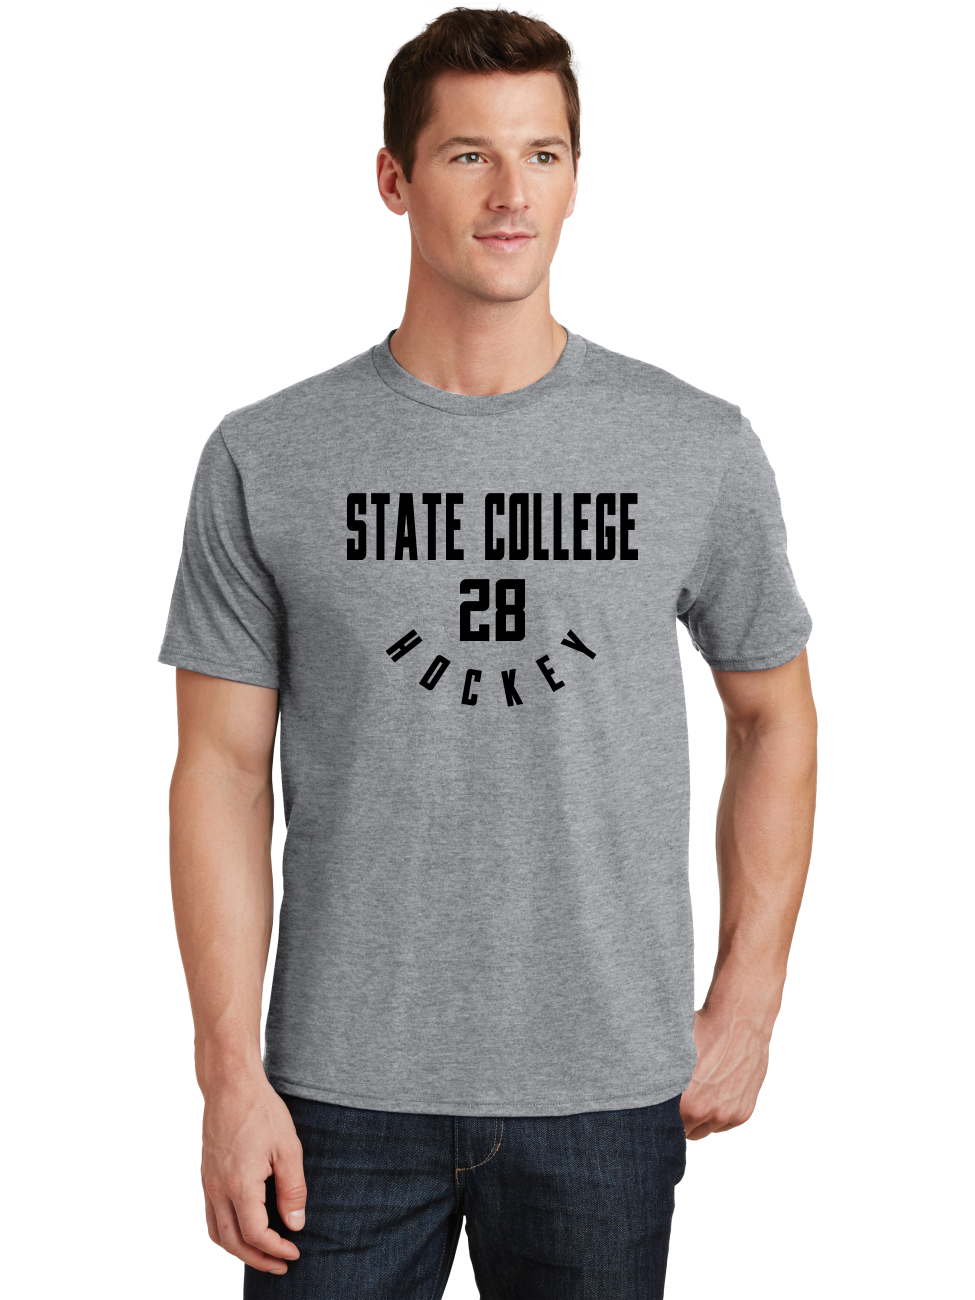 Player # T-Shirt - State College HS